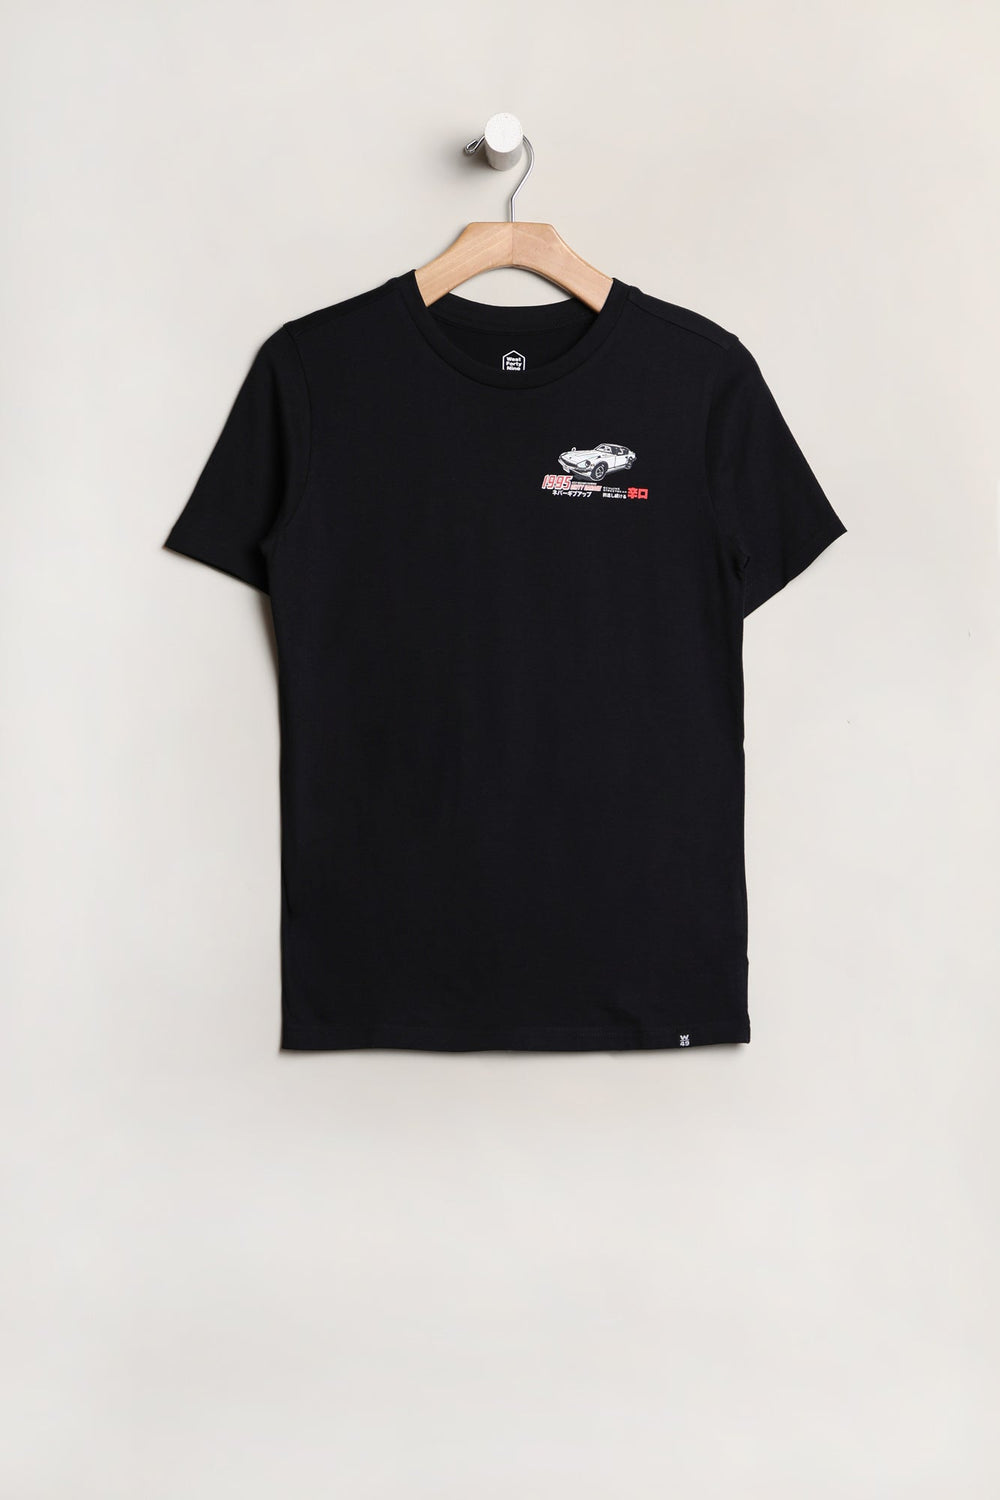 West49 Youth Graphic Black T-Shirt Black